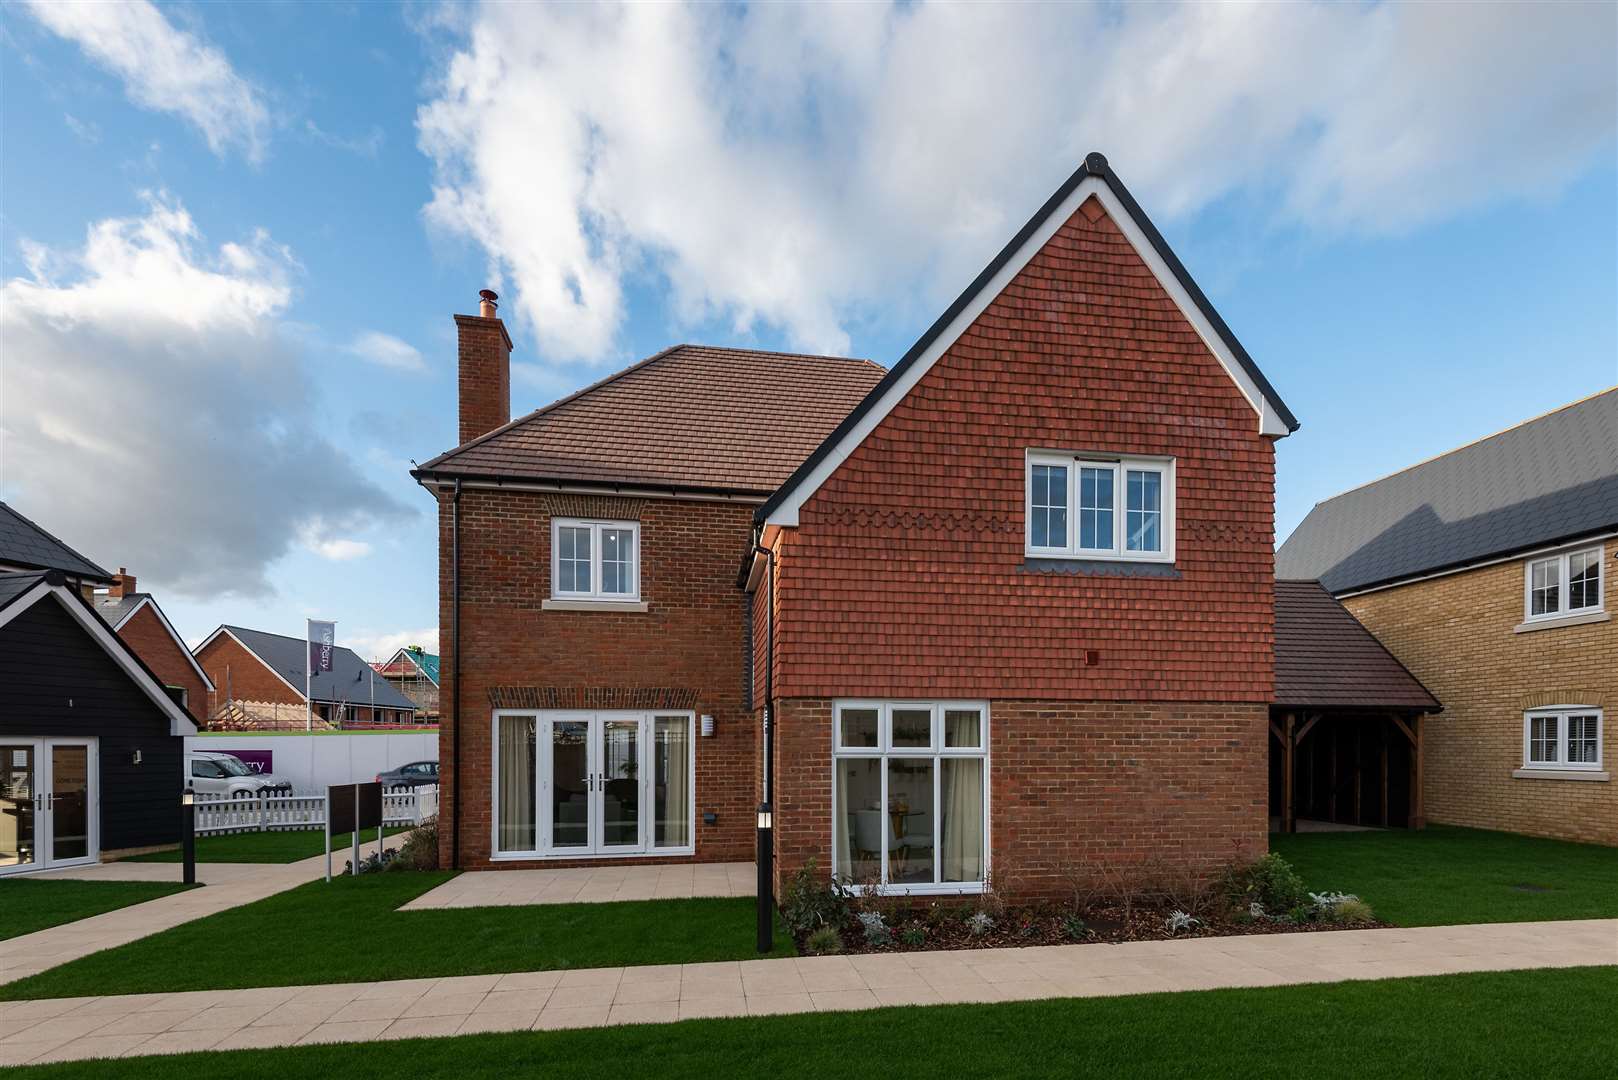 Images of Hyde's Evabourne development at Peter’s Village in Wouldham. Picture: The Hyde Group